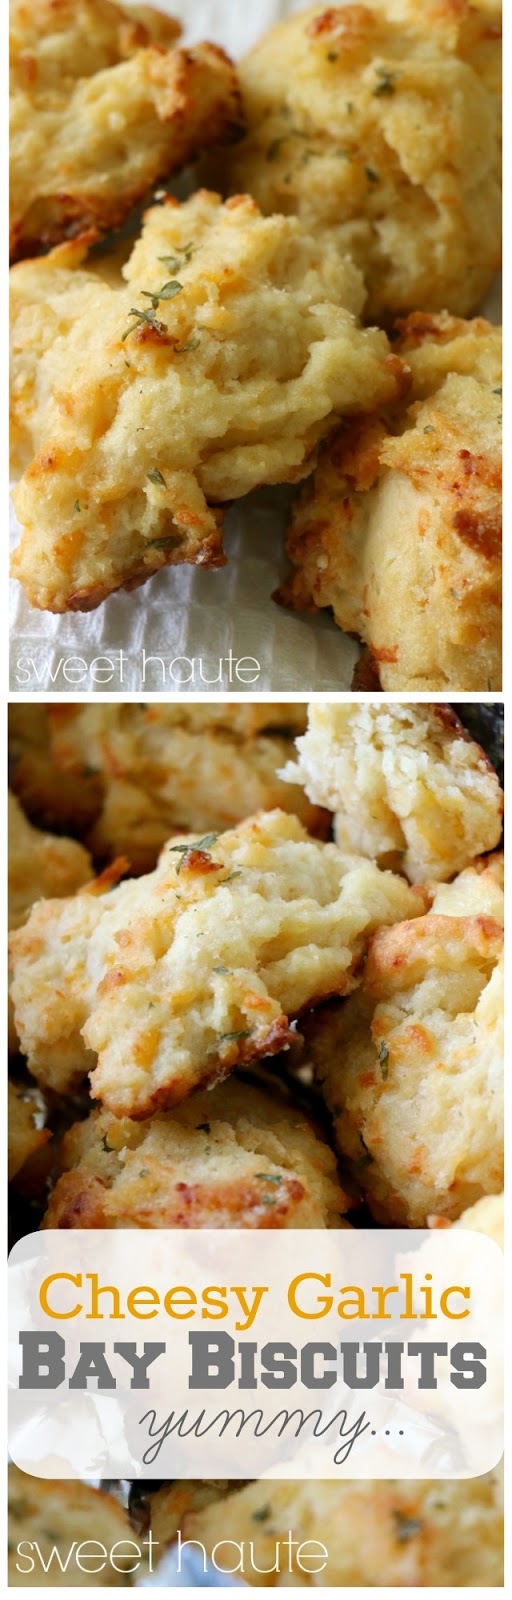 http://sweethaute.blogspot.com/2015/04/cheesy-garlic-bay-biscuits.html